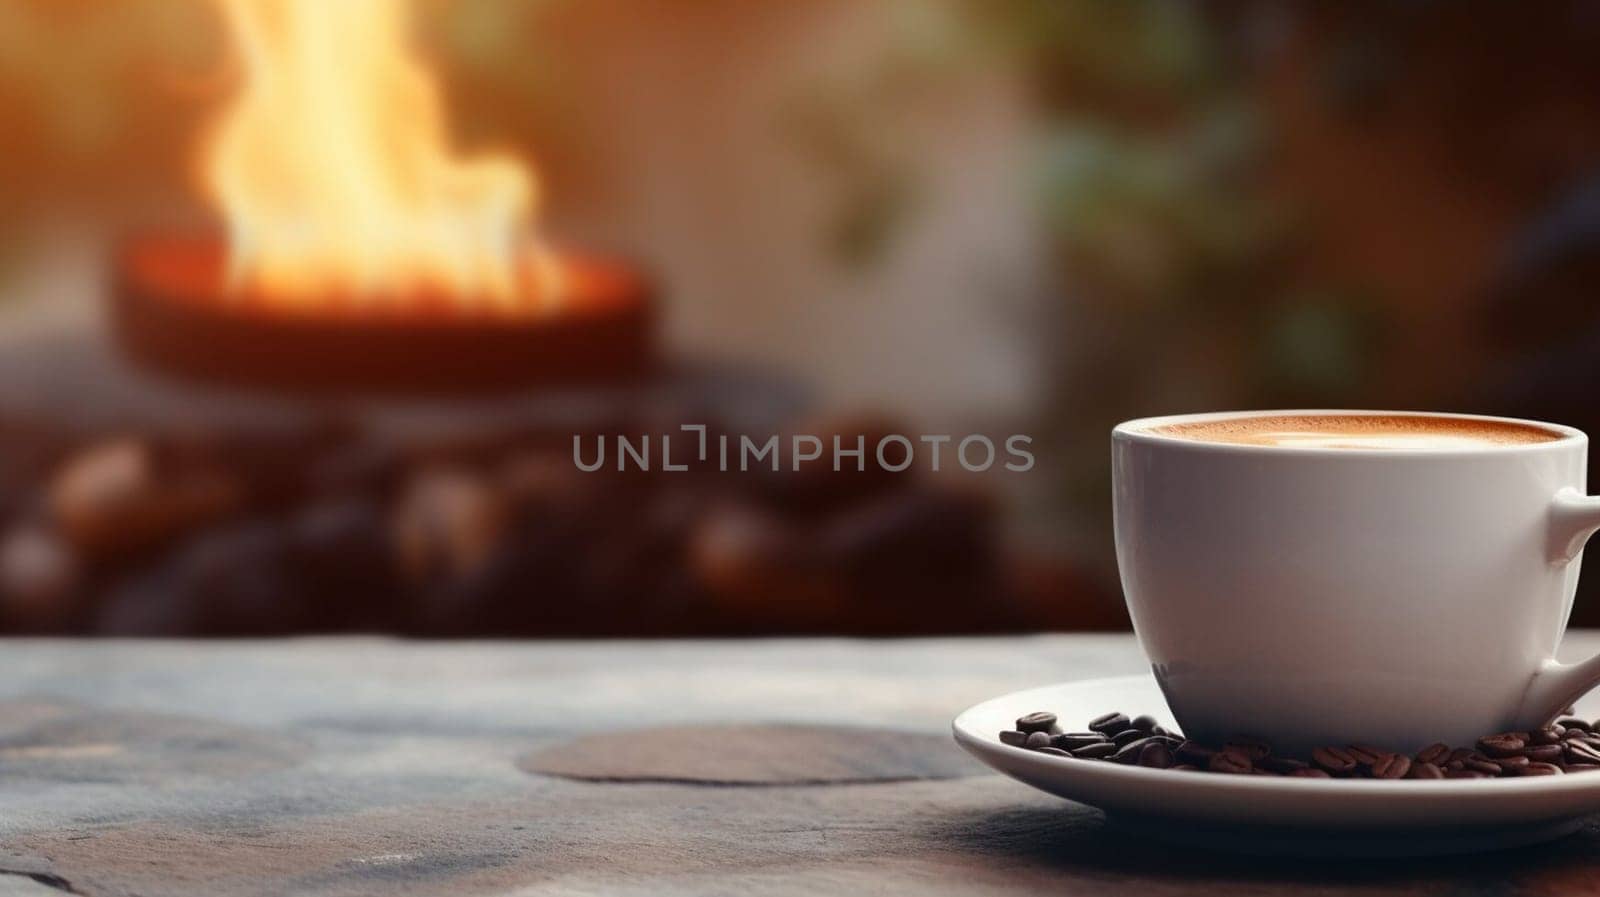 Latte, coffee or cappuccino mug on wooden table in a cafe, beautiful with natural light, vintage tones, food and drink. Copy space for text banner by sergeykoshkin